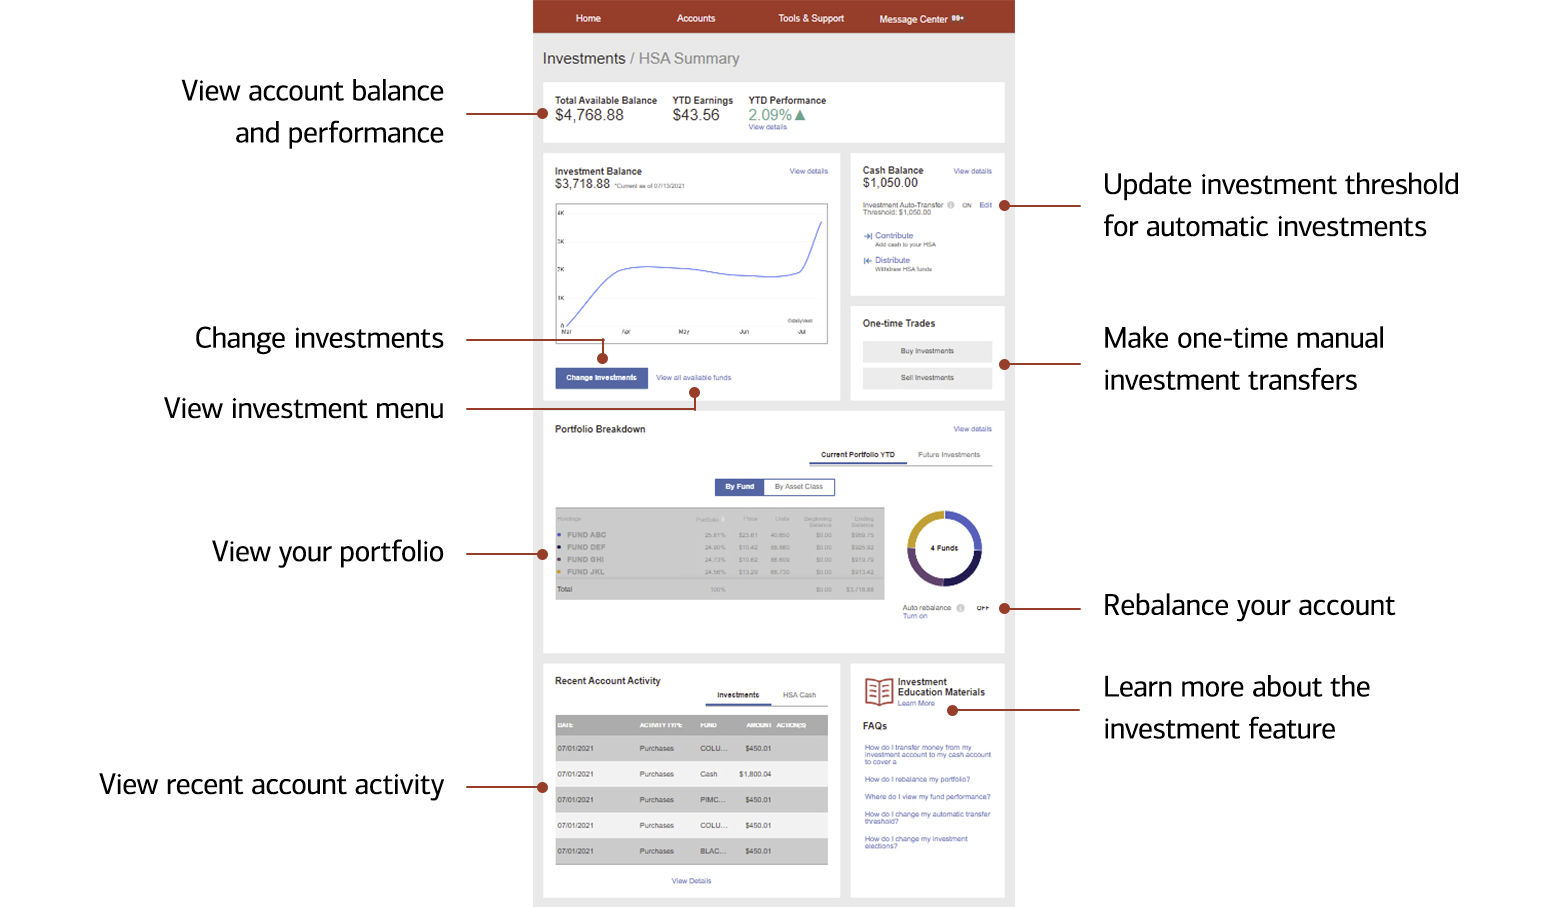 Screenshot of the Investments tab on the member website highlighting common account functions: View account balance and performance, update investment threshold for automatic investments, change investments, view investment menu, make one-time manual investment transfers, view your portfolio, rebalance your account, view recent account activity, learn more about the investment feature.